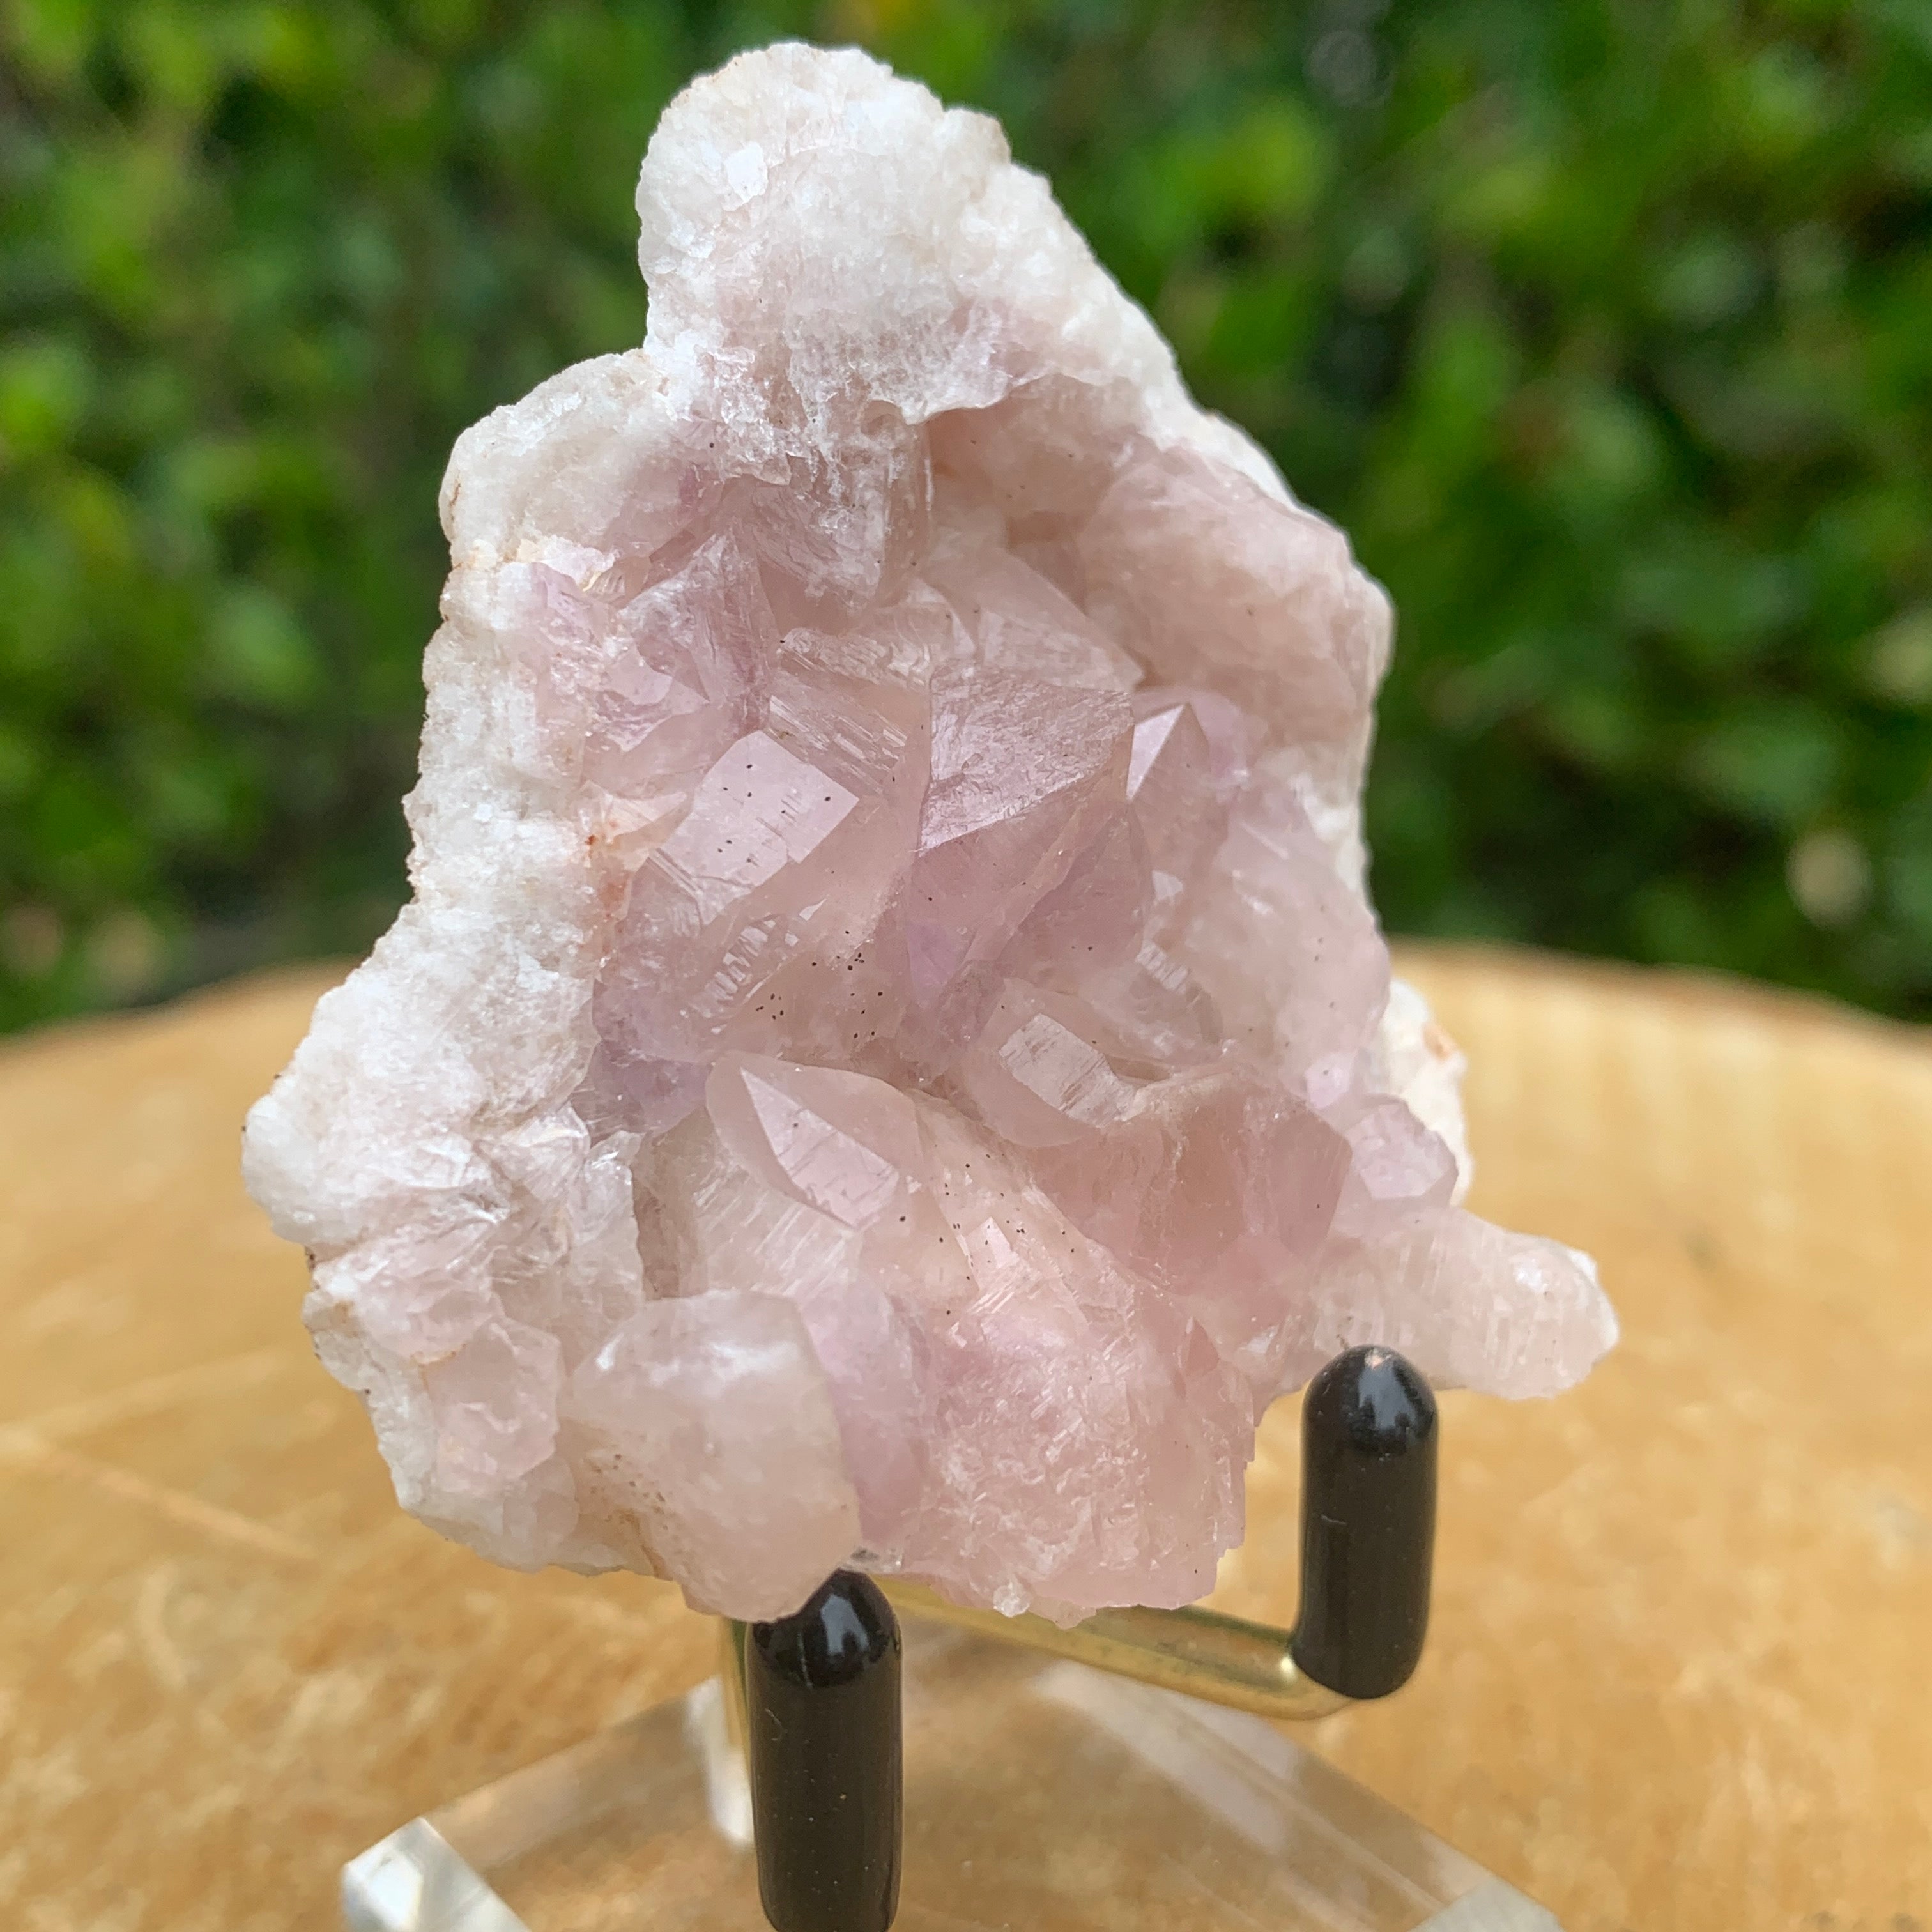 32.0g 5x4x2cm Pink Pink Amethyst from Argentina